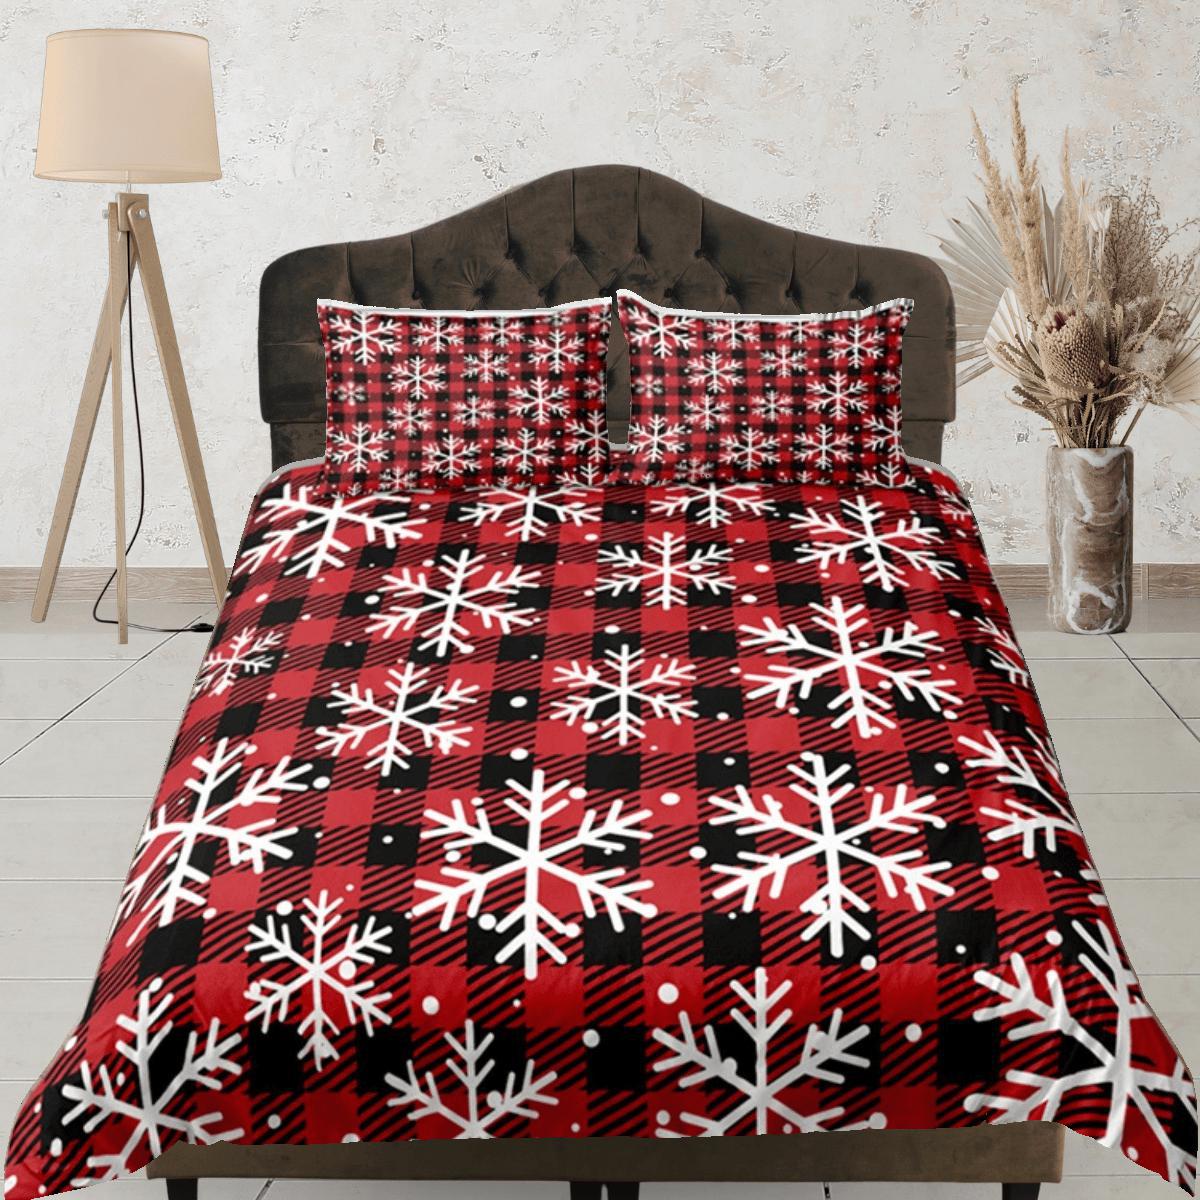 daintyduvet Red Check Christmas Duvet Cover Set Bedspread, Dorm Bedding with Pillowcase